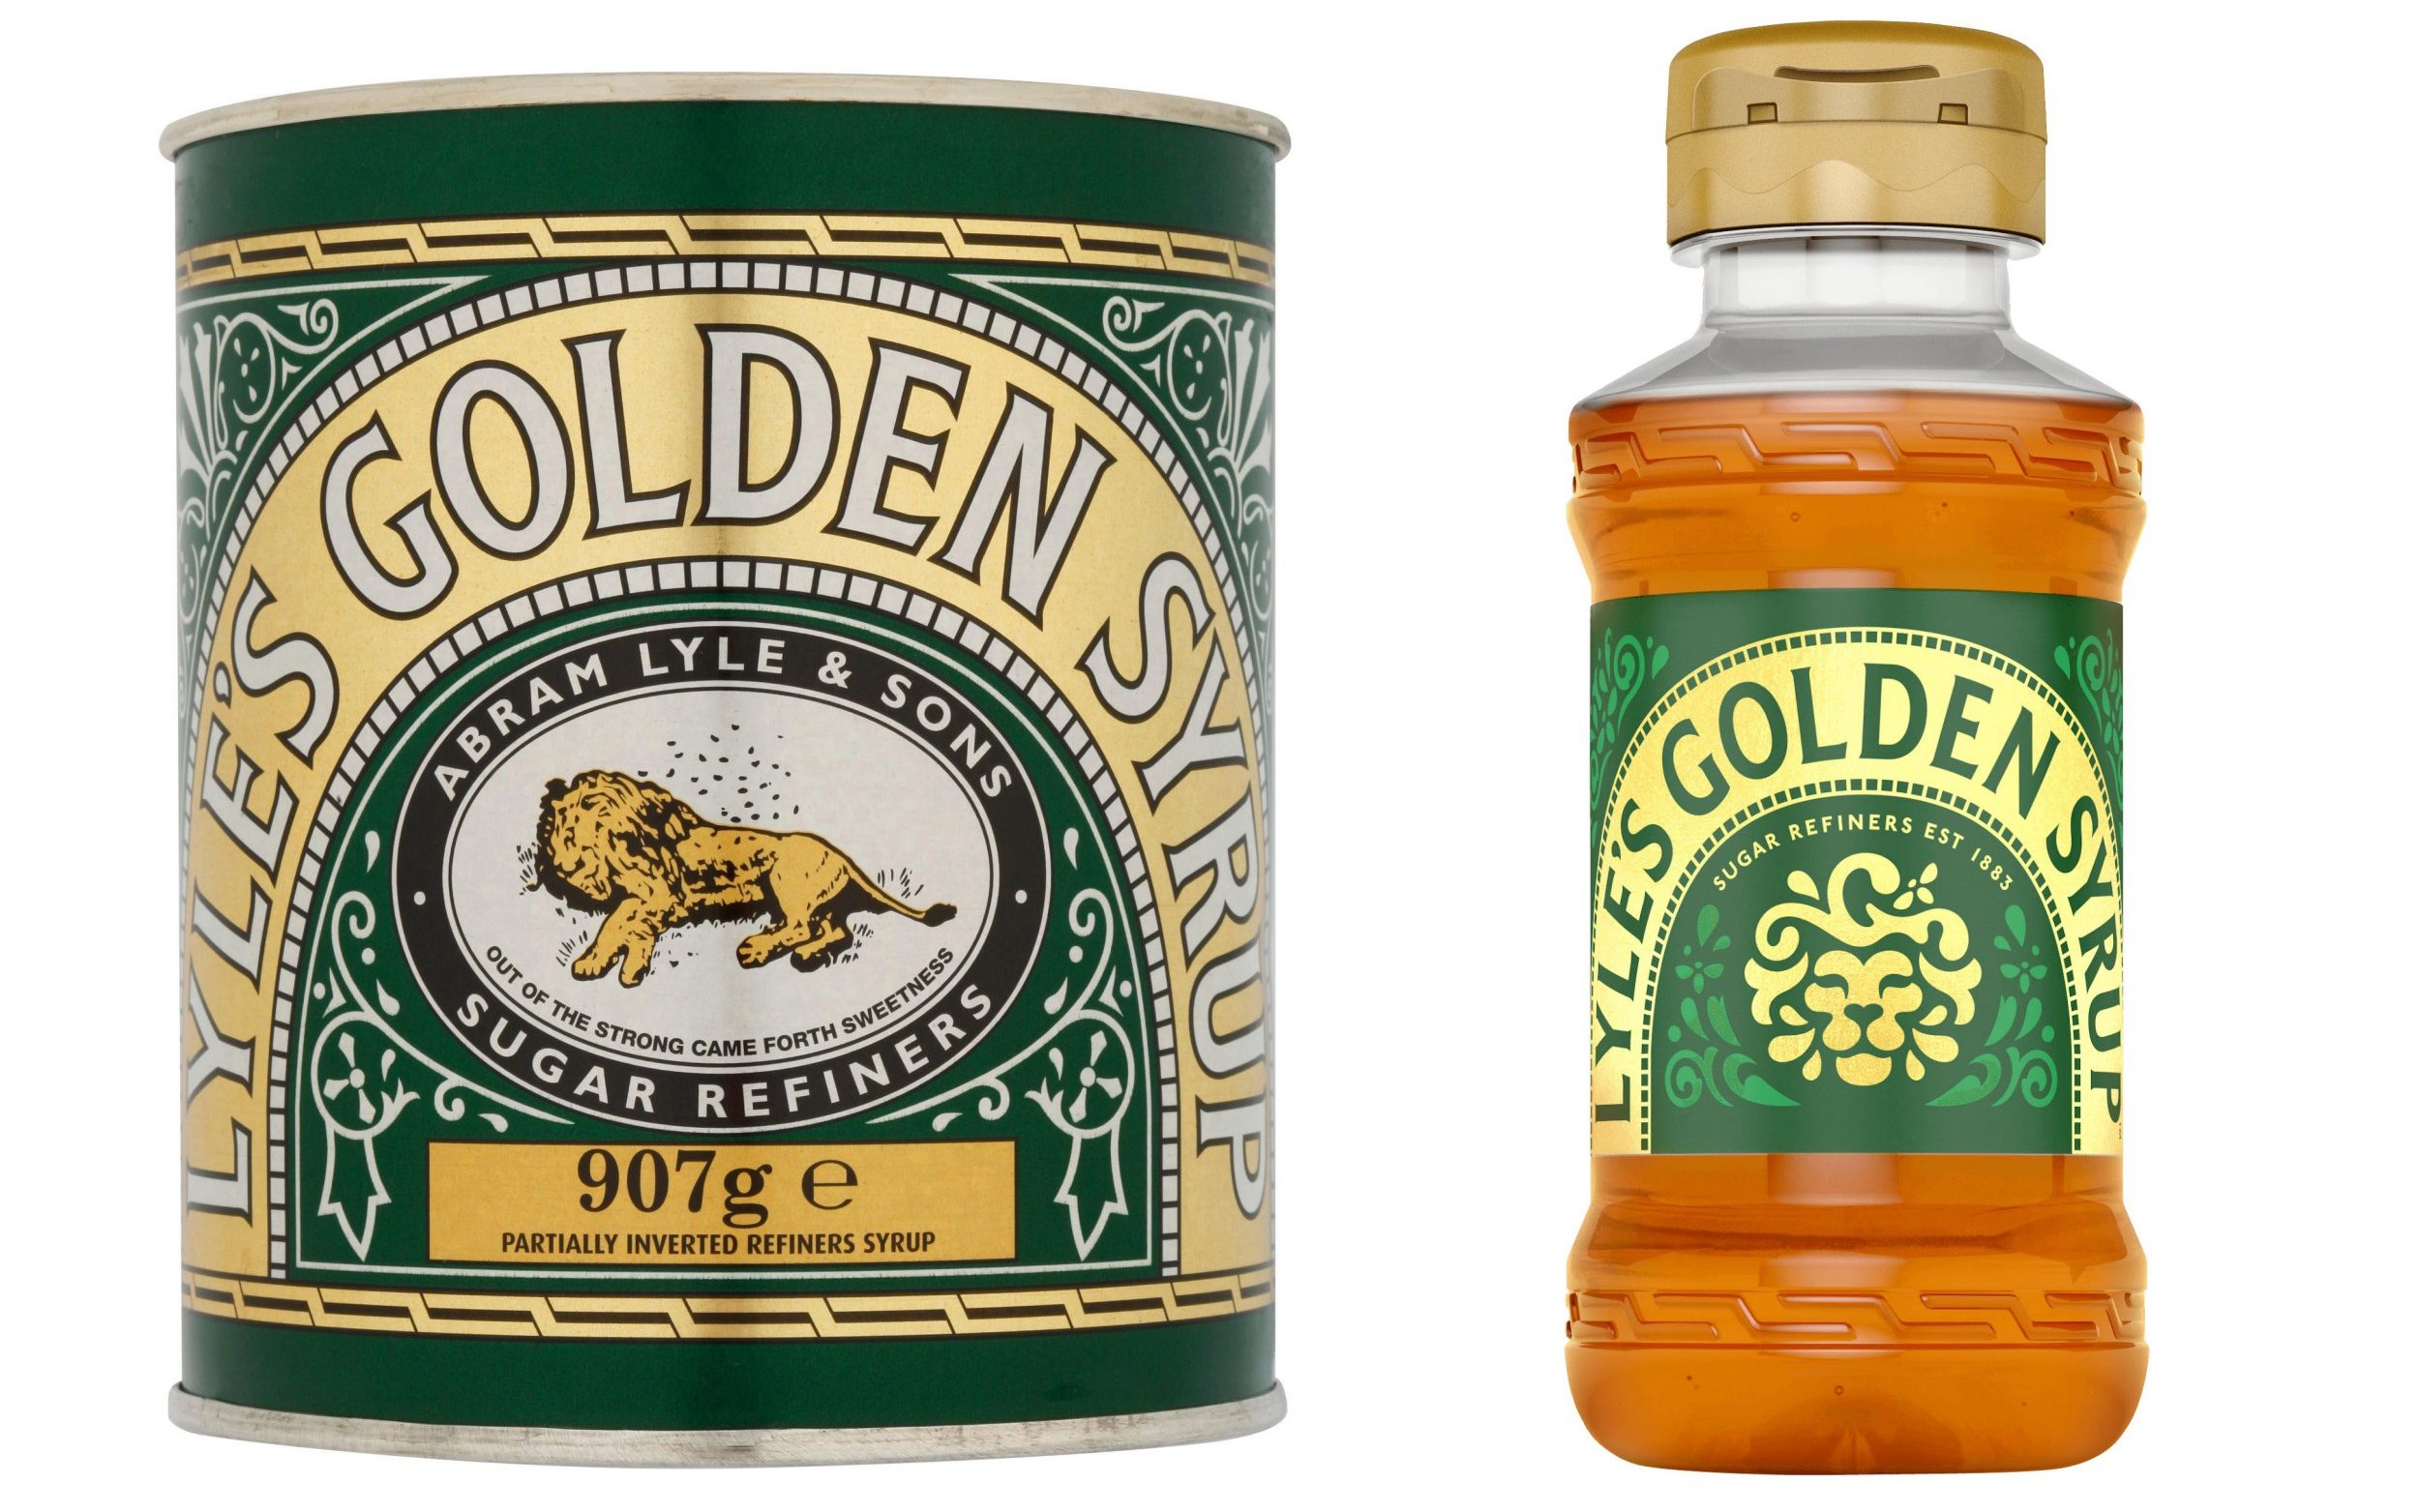 lyle's golden syrup attacked by christians over logo change